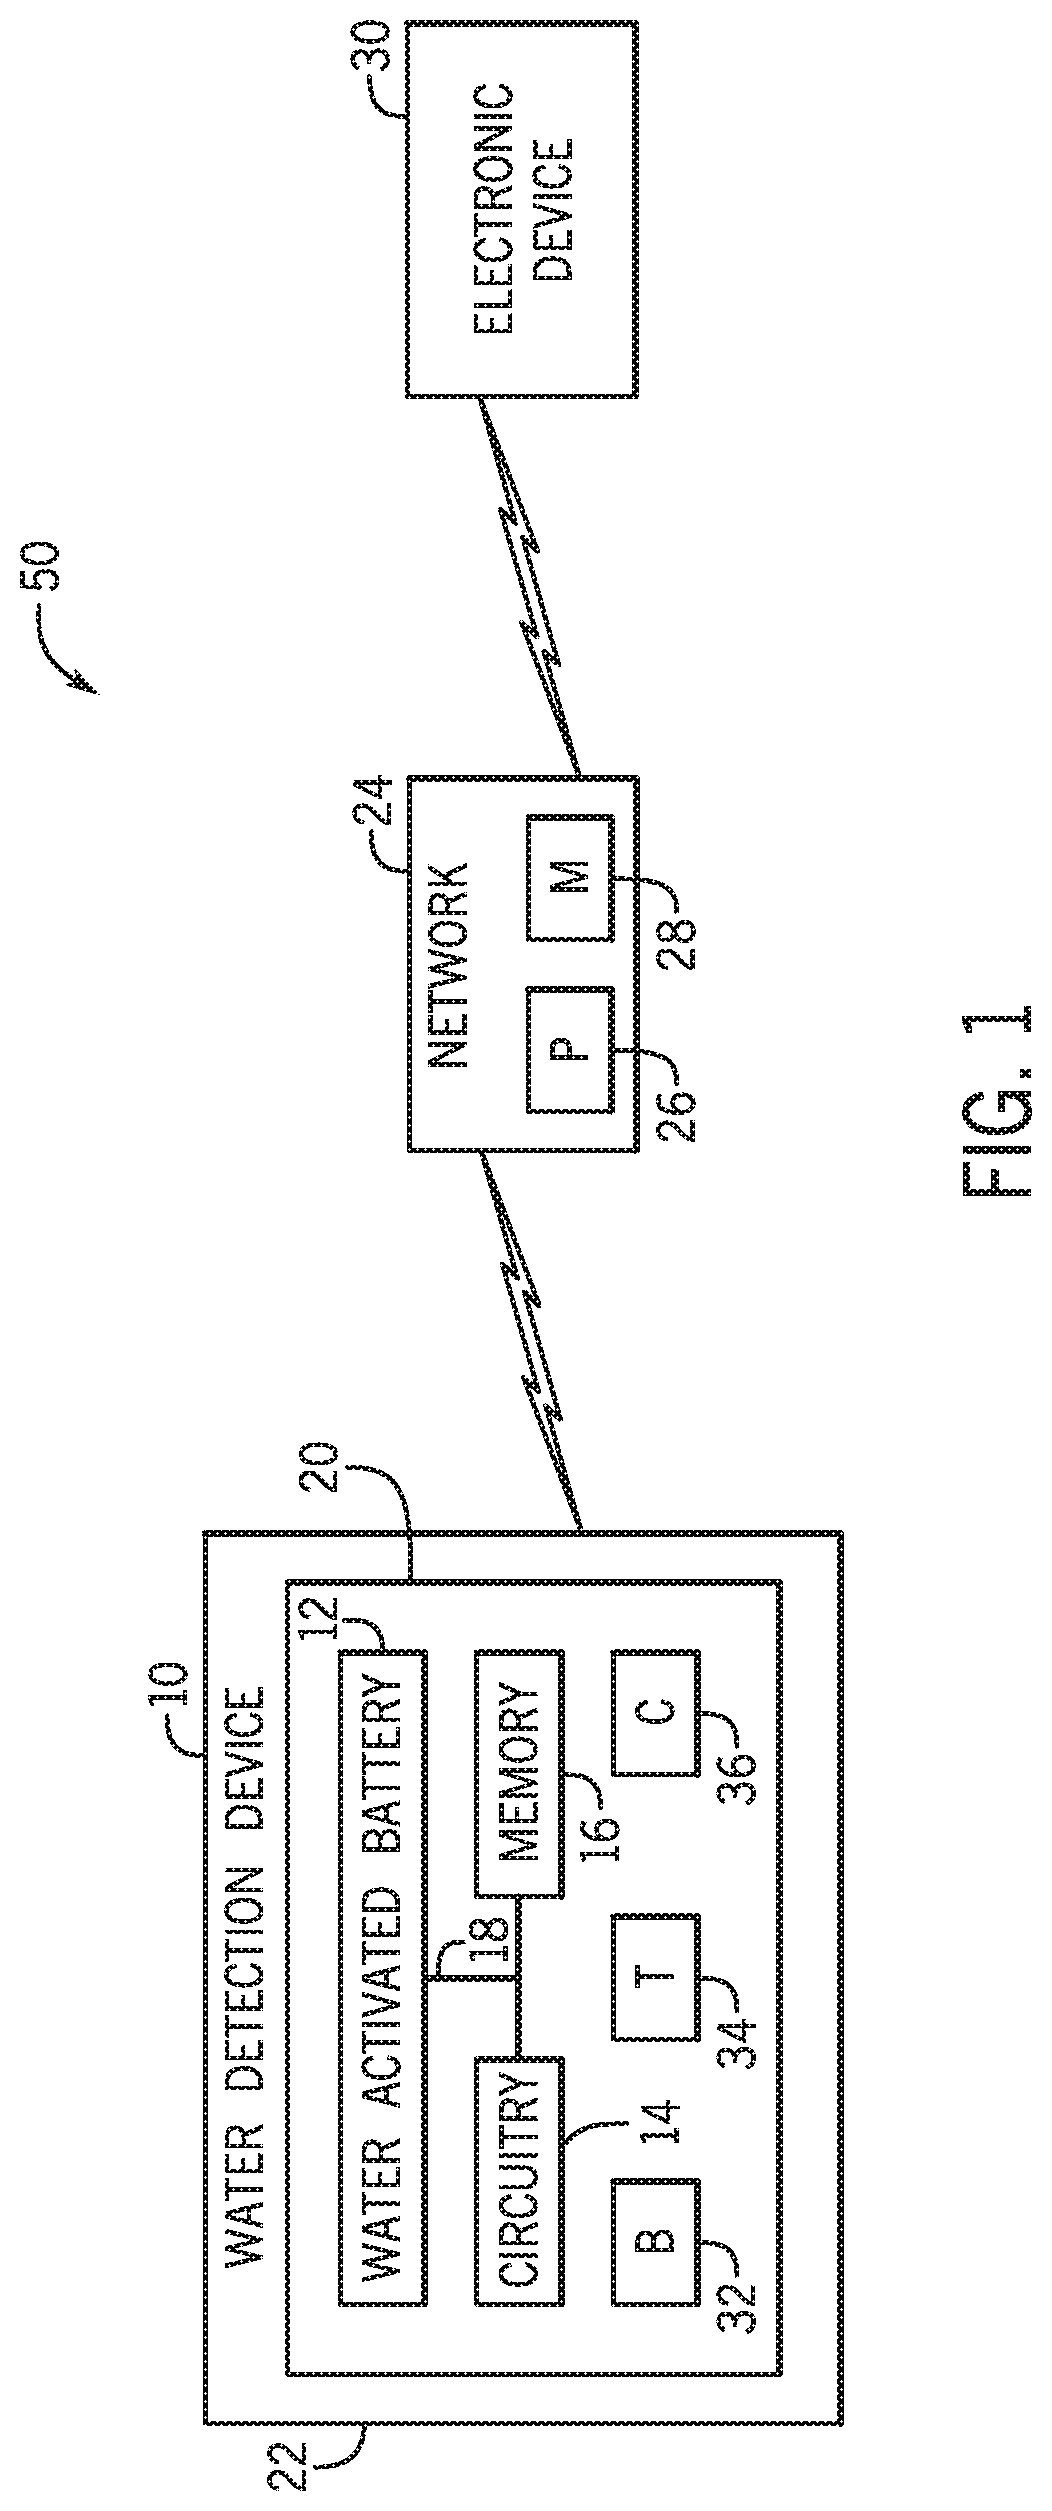 Systems and methods for detecting water events in vehicles